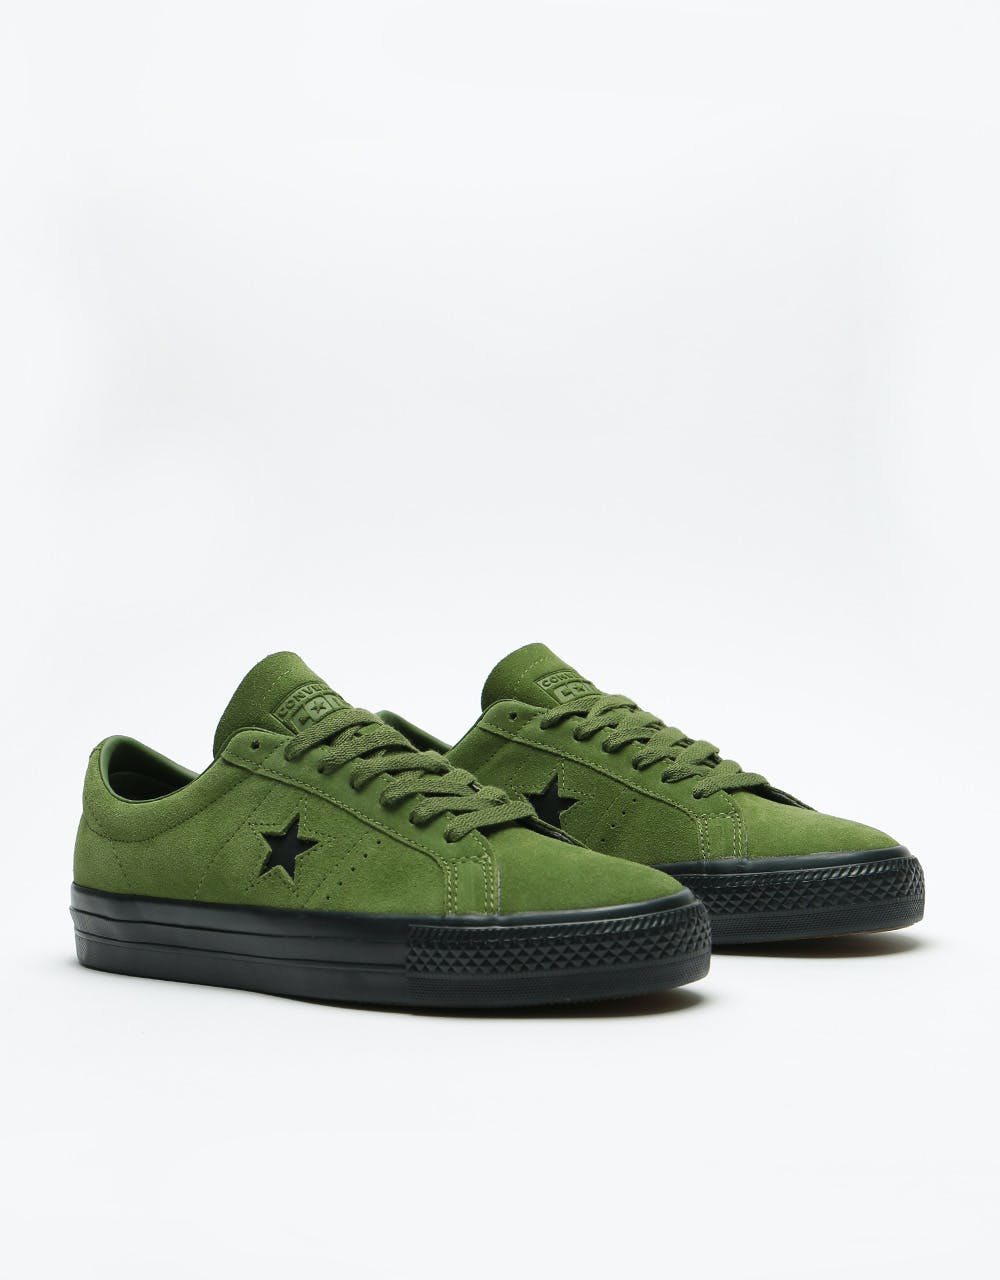 Converse One Star Pro Ox Suede Skate Shoes - Cypress Green/Black/Black